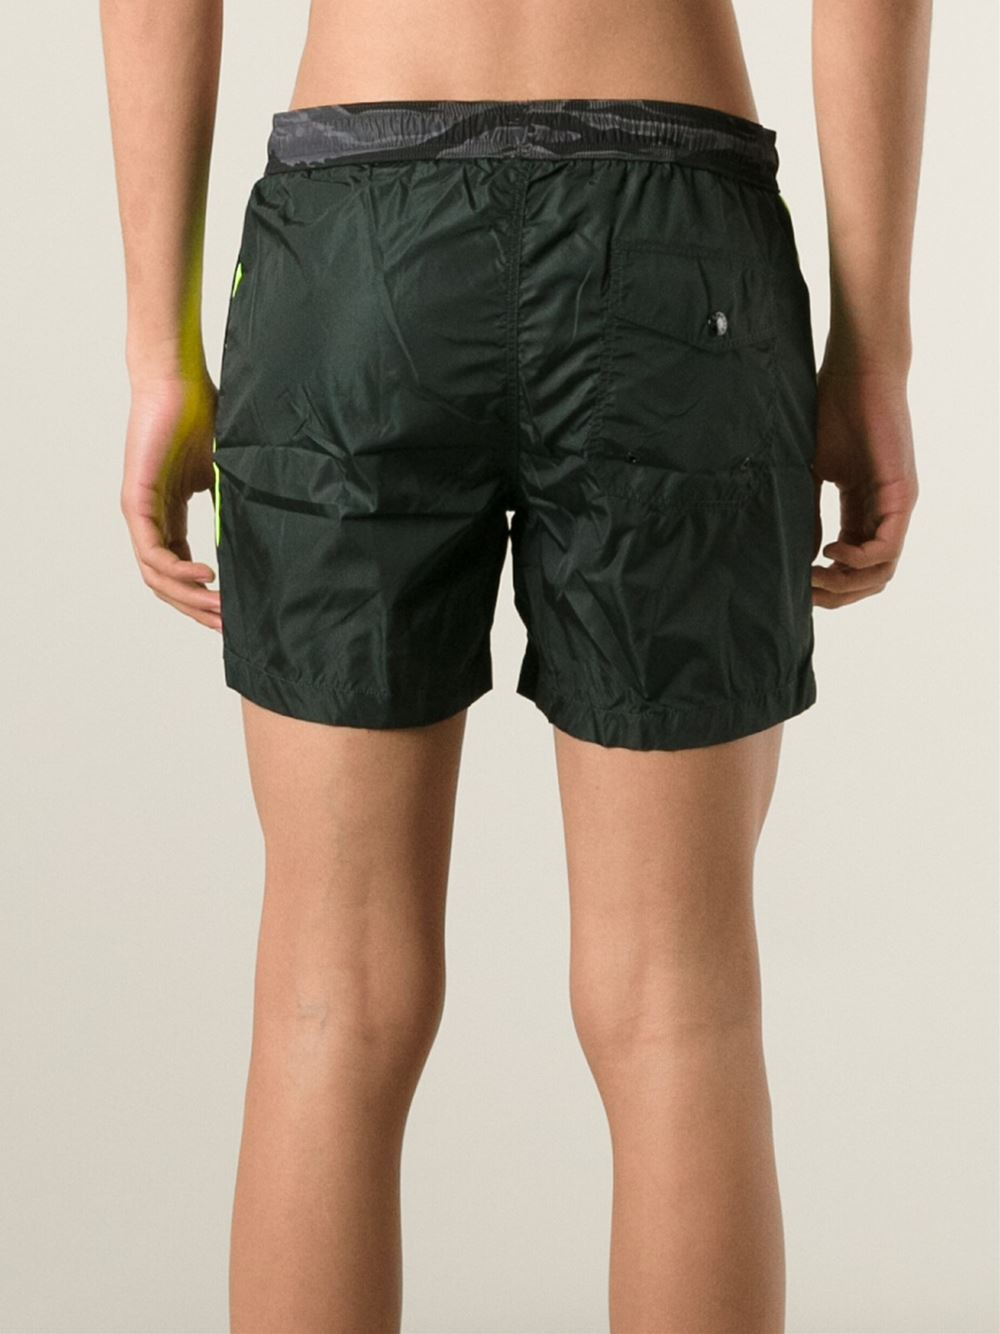 Moncler Camouflage Swimming Shorts in Black for Men - Lyst